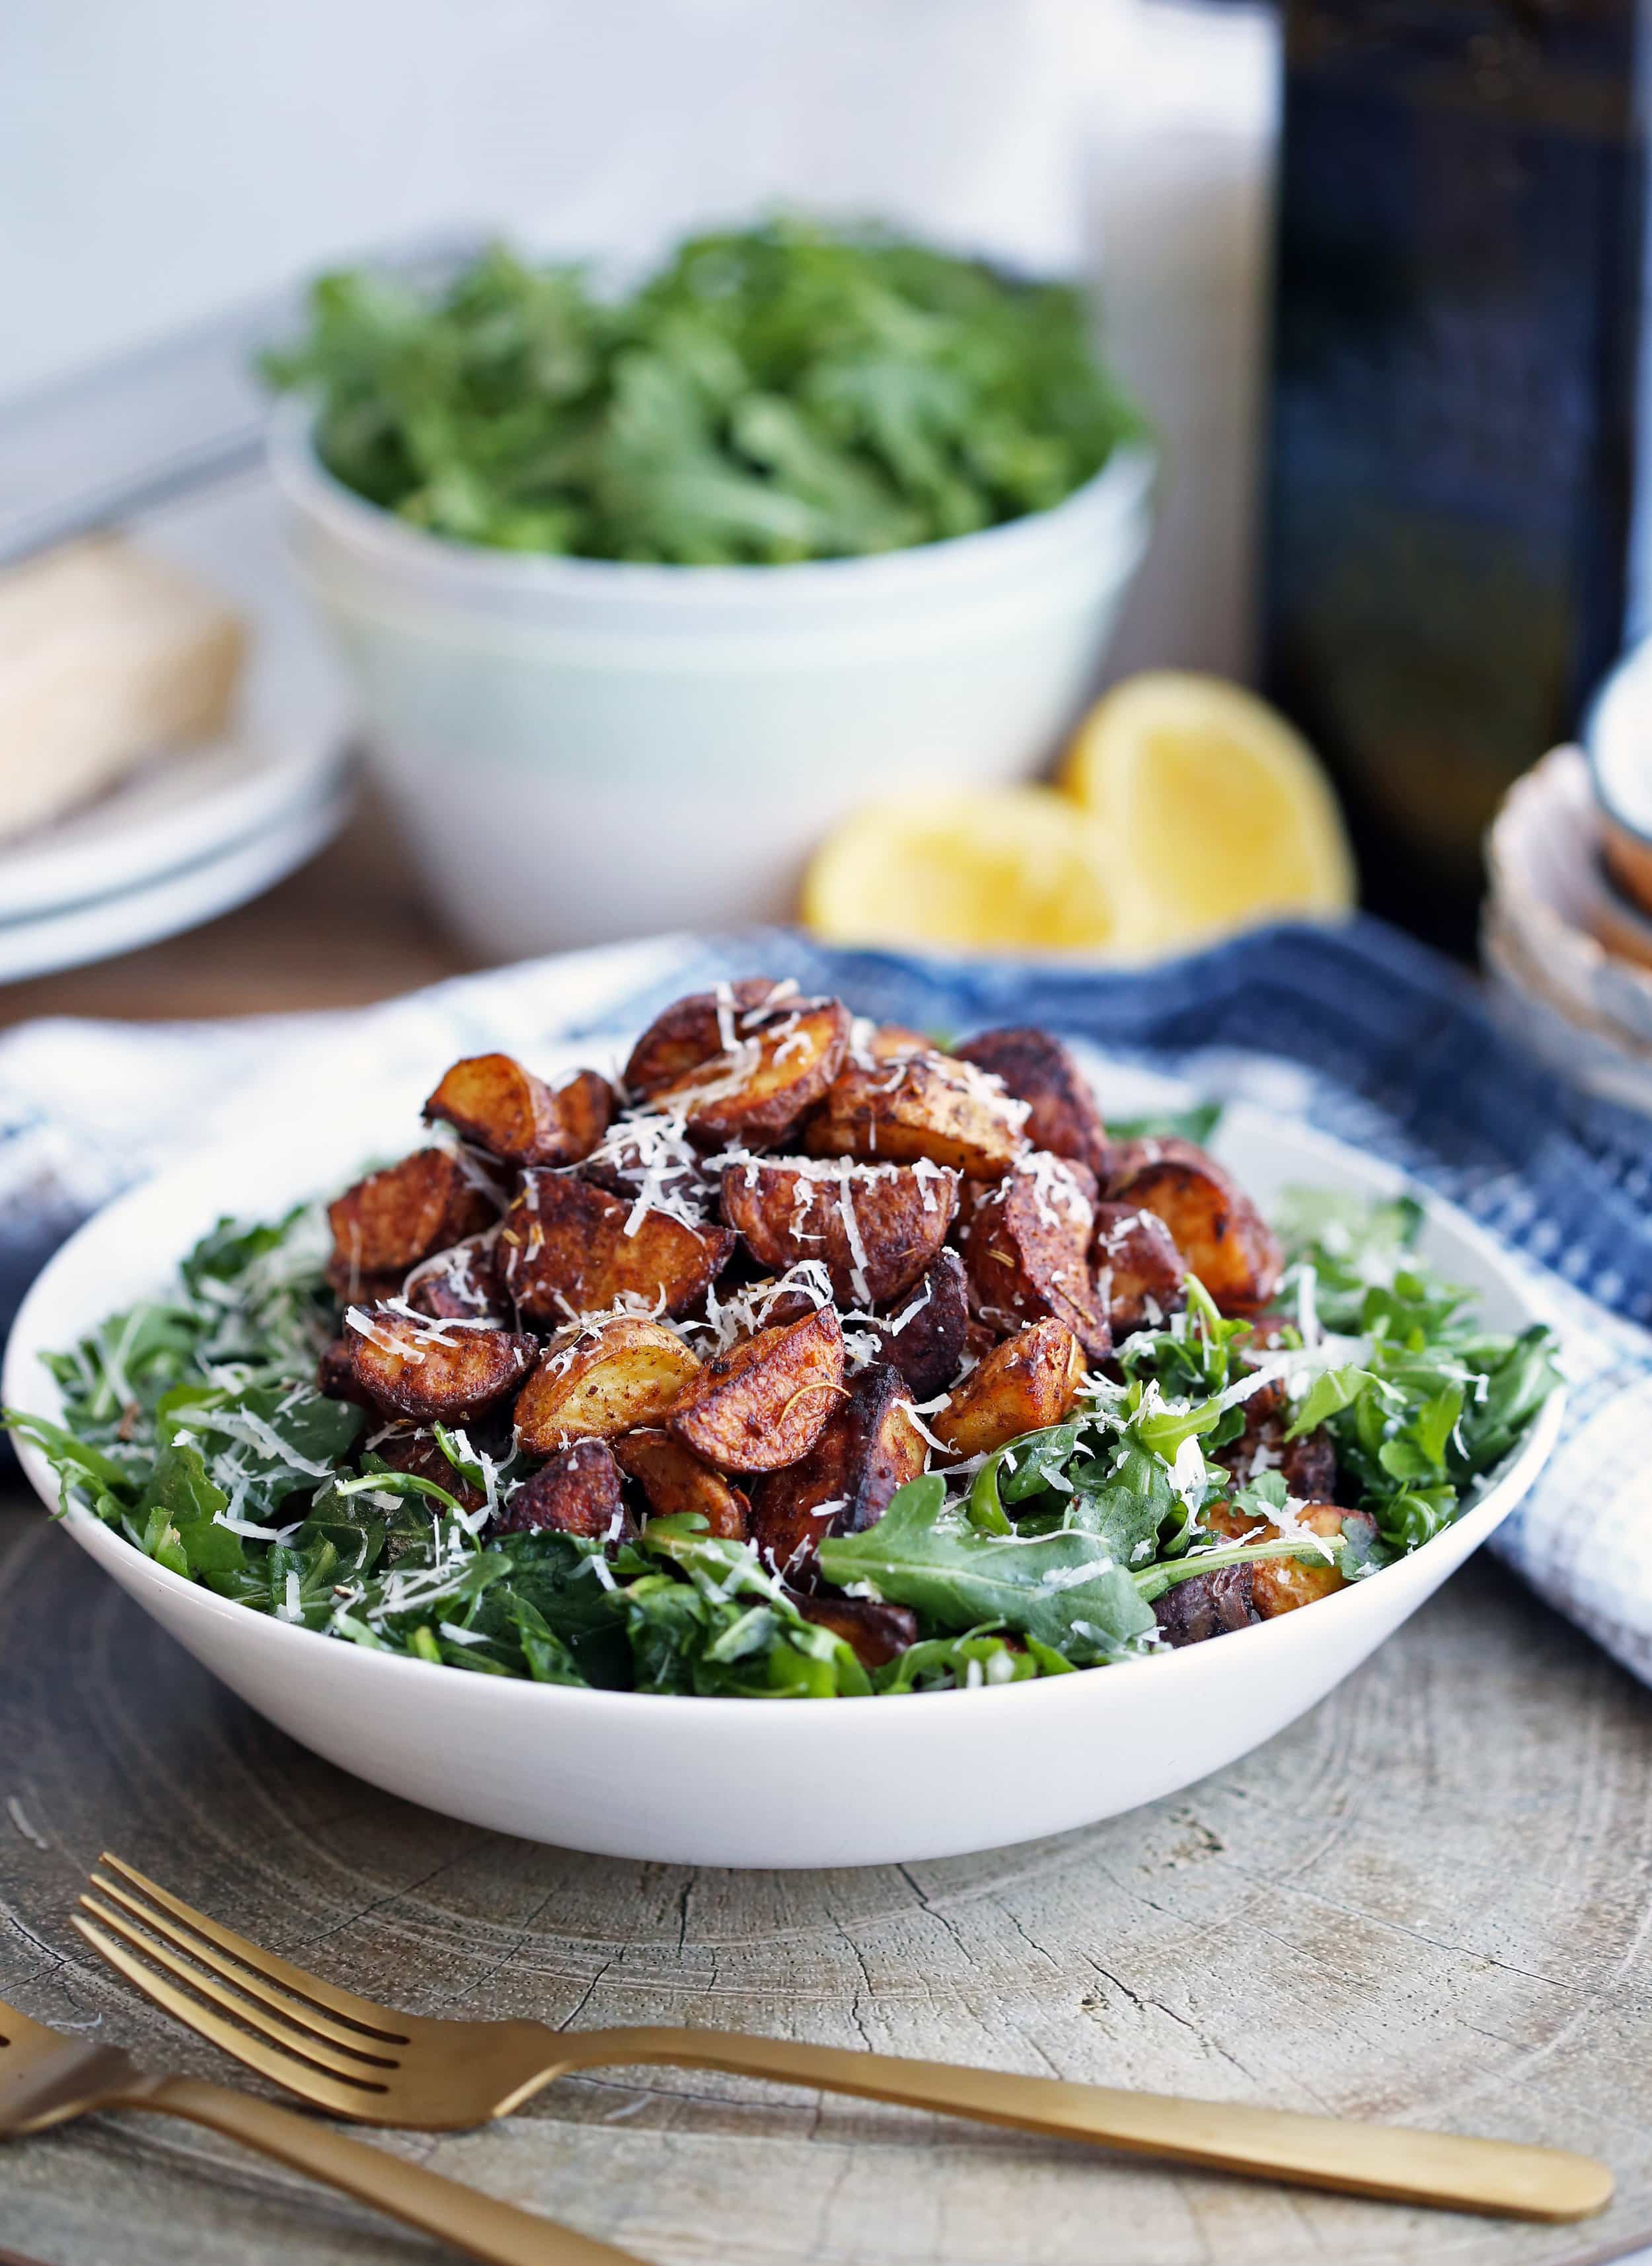 Crispy roasted spiced baby potato and arugula salad topped with parmesan cheese in a large white bowl.